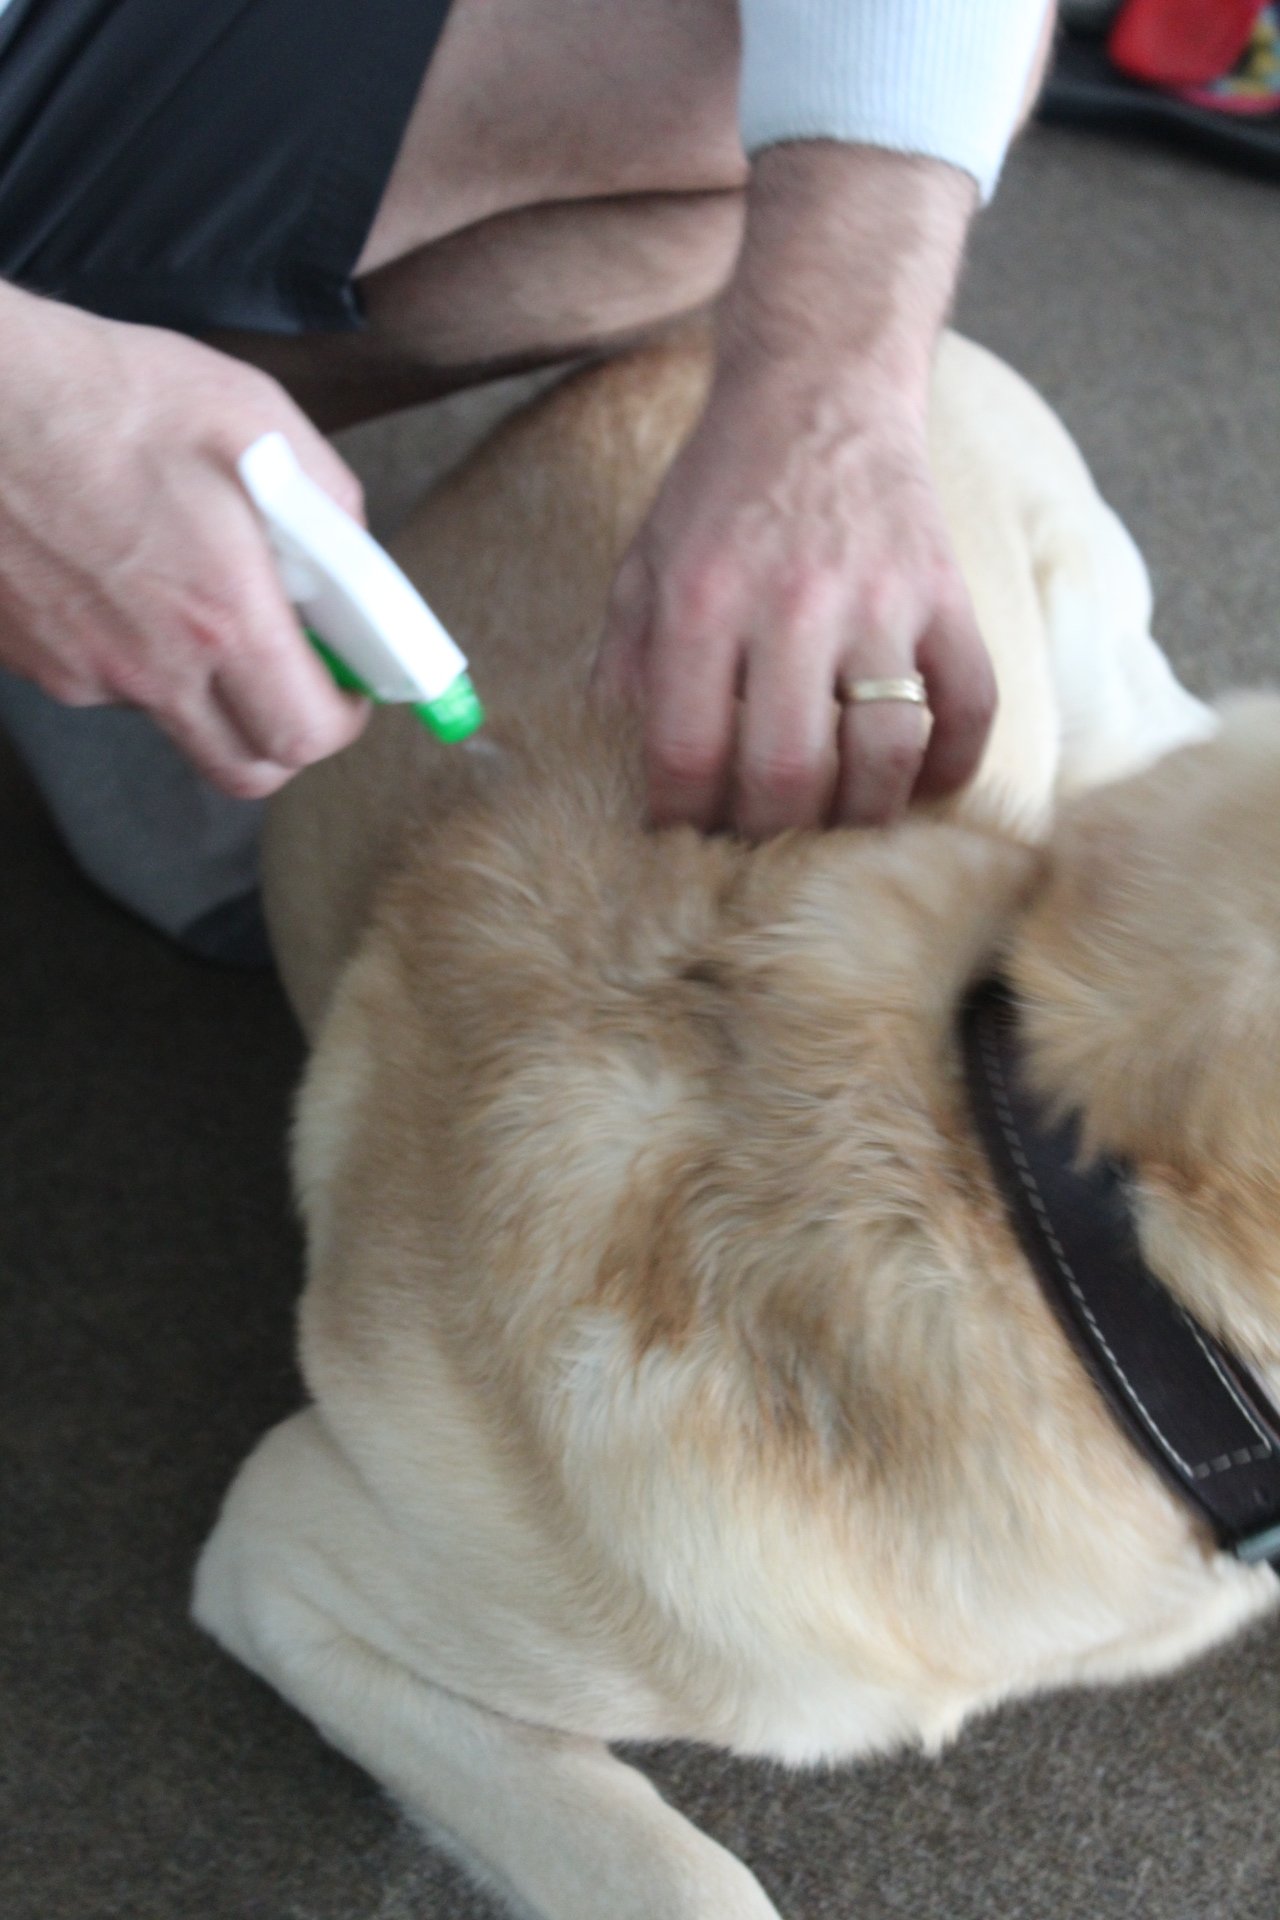 How to get rid of fleas on dogs